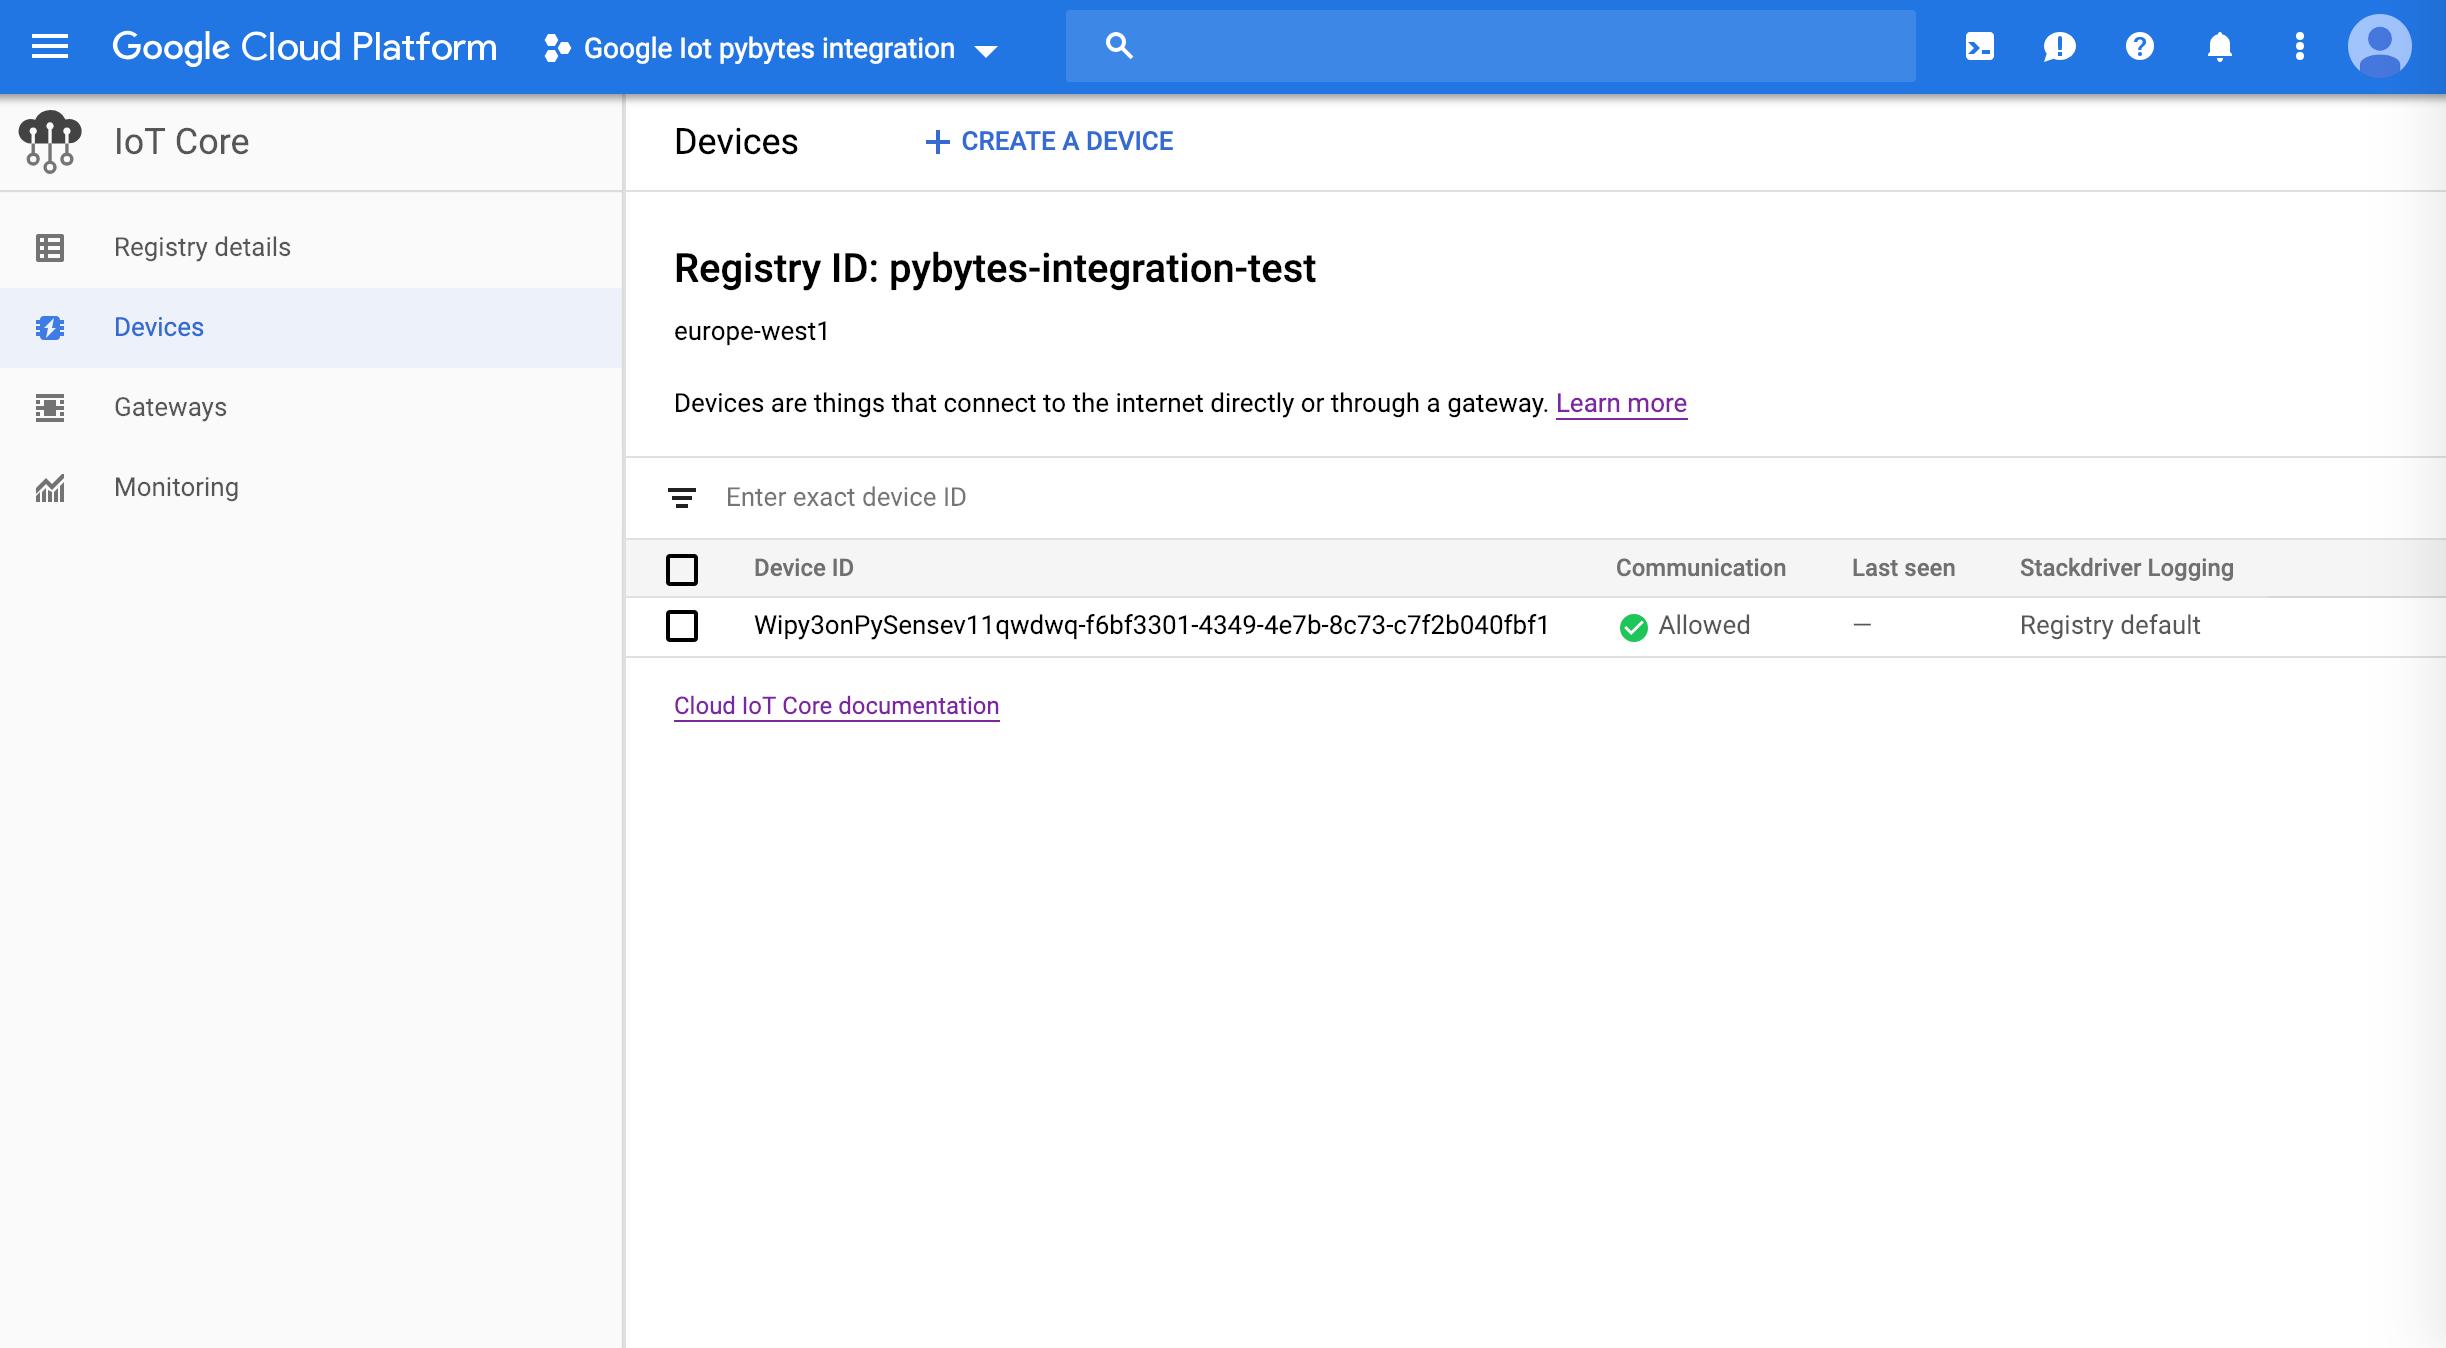 Google registry’s devices view